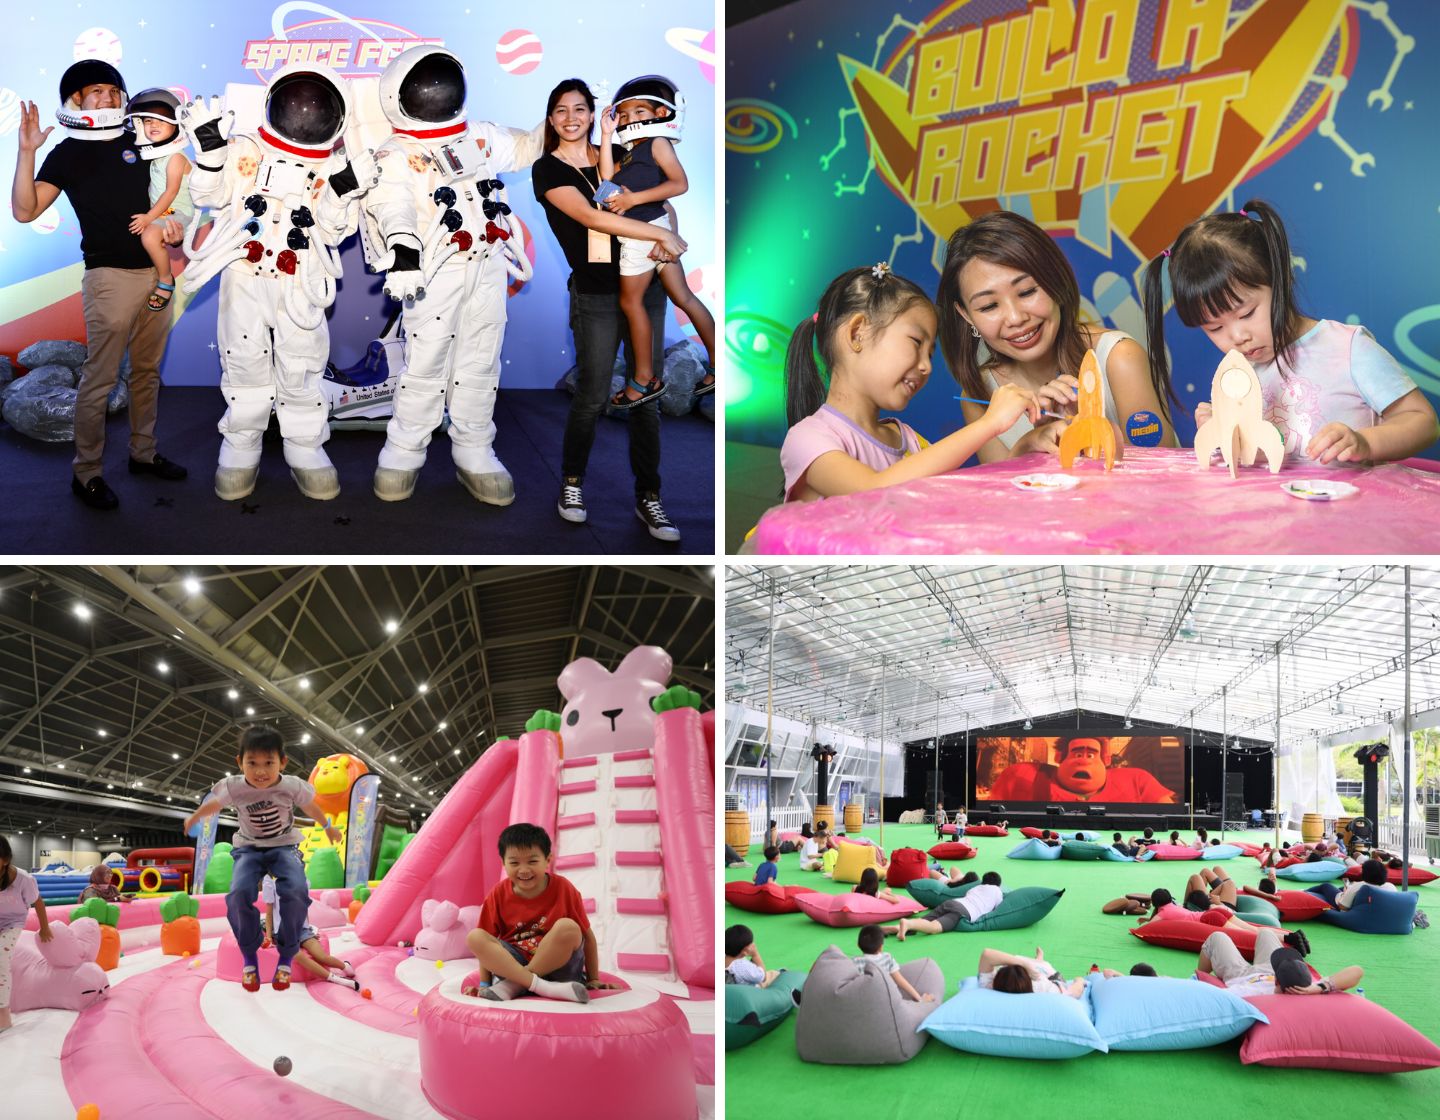 Space Fest @ EXPO: Carnival Rides, Crafts & Food Trucks